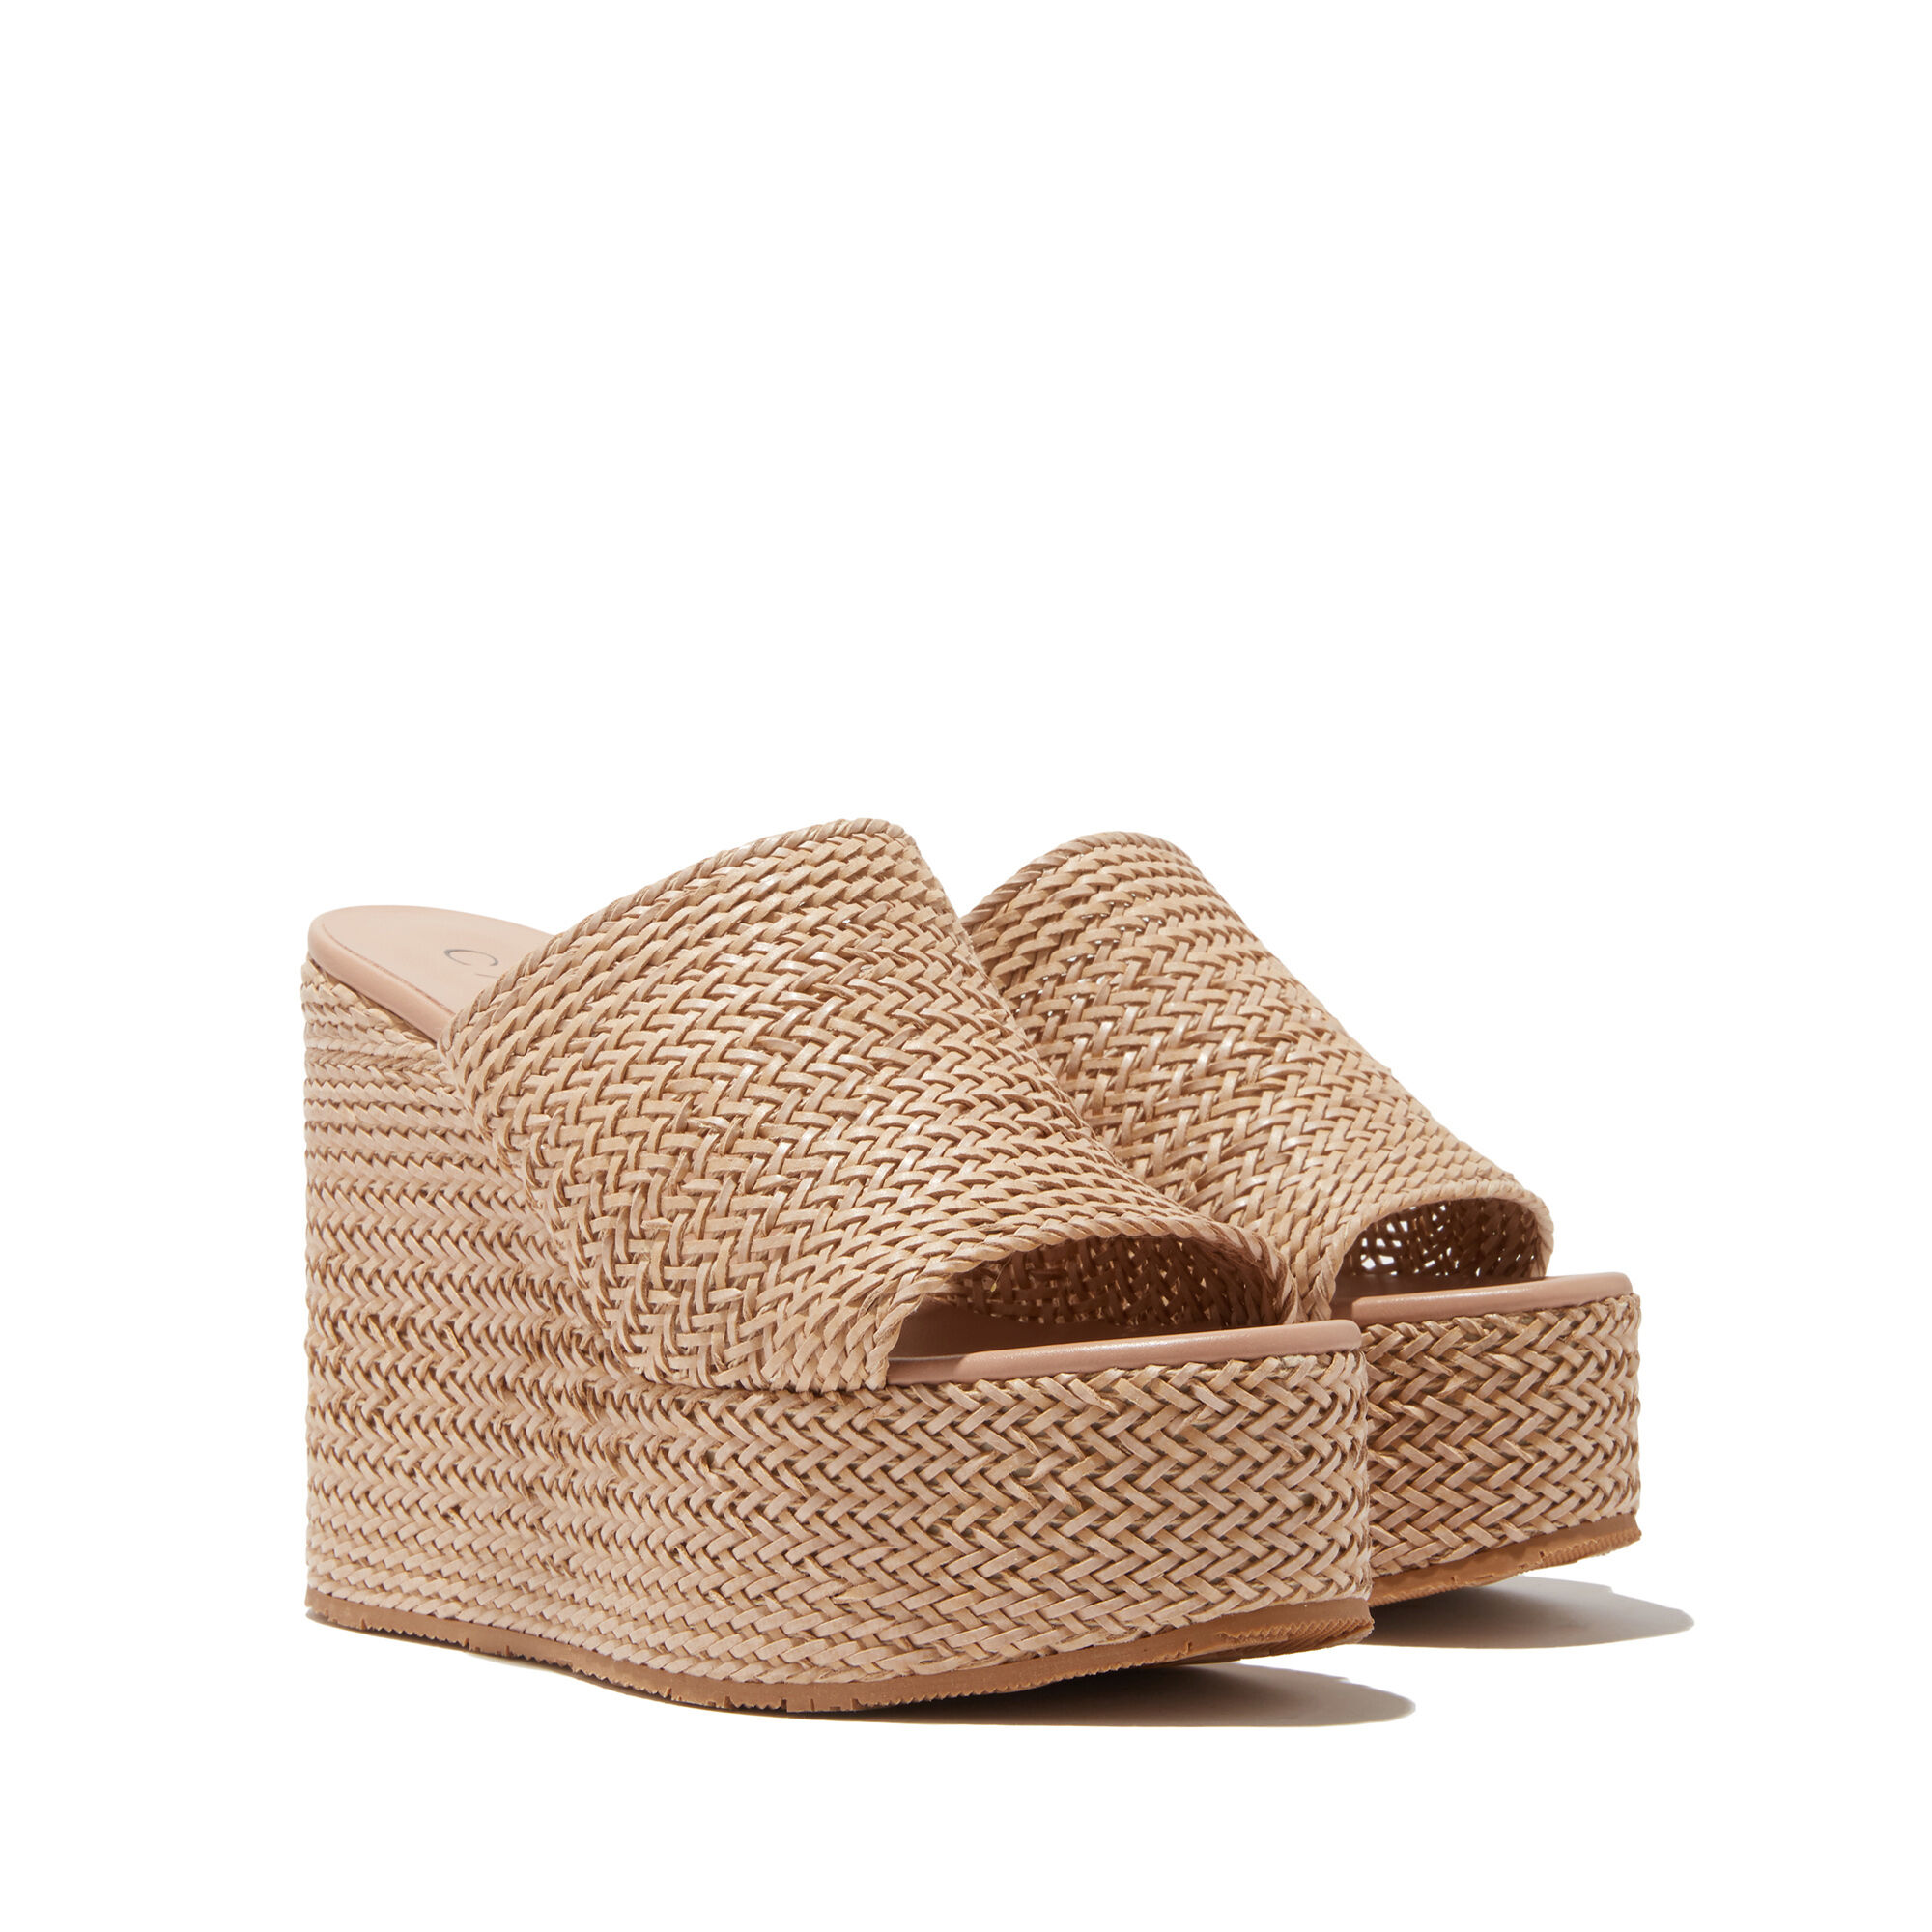 Twiga Wedges and Slides in Dafne for Women | Casadei®